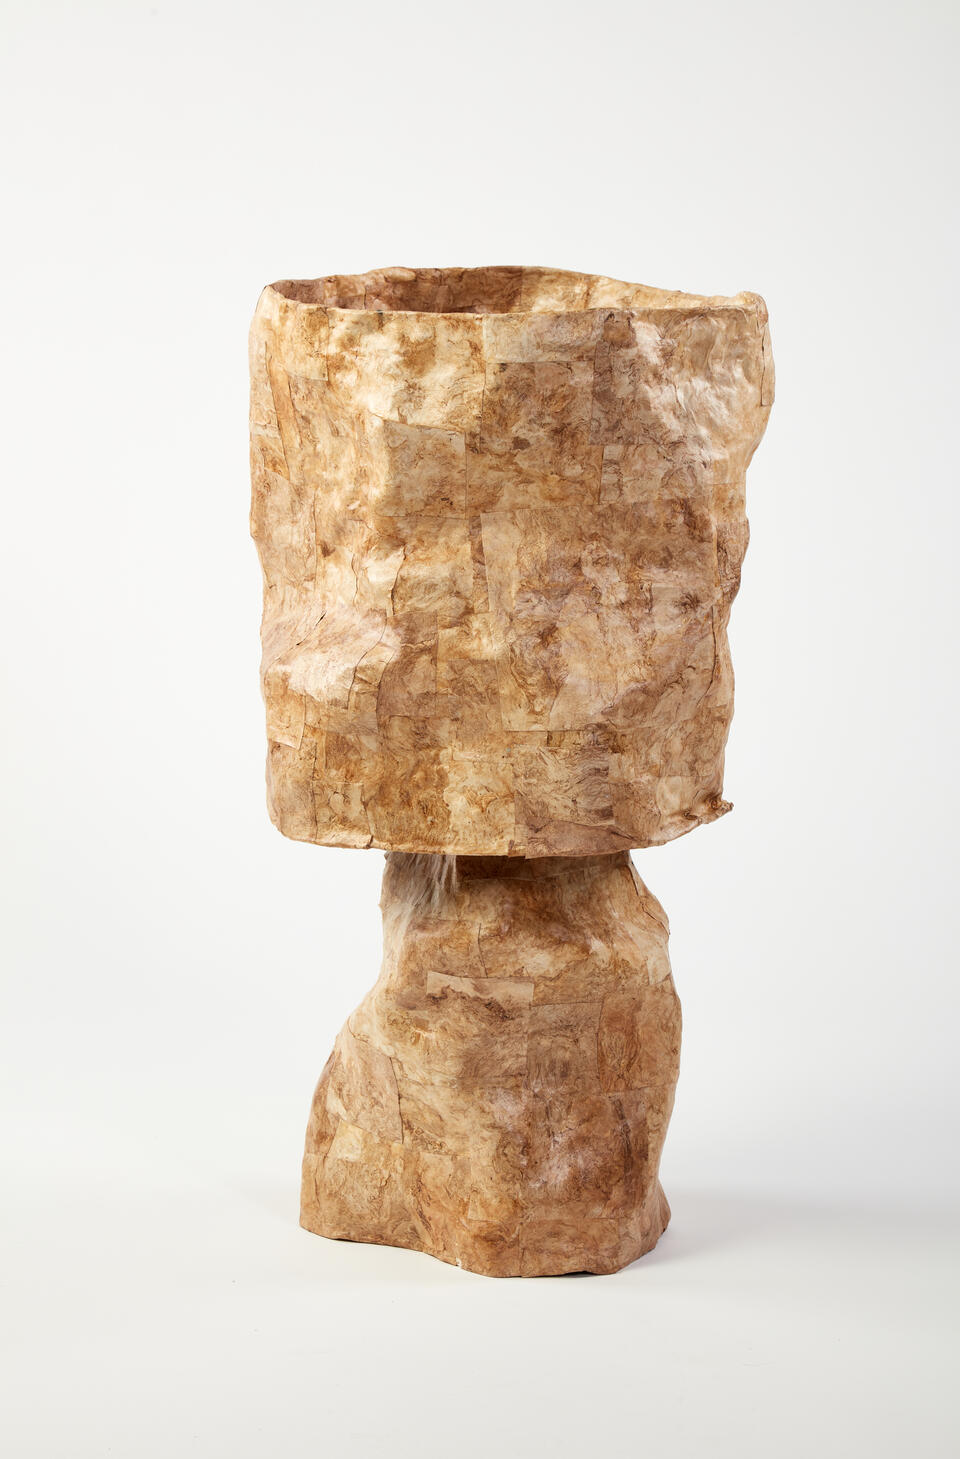 This golden hued lamp is made of paper with vivd swirls of naural fibers that move in all directions. The paper is cut into squares and collaged on the lamp shade and base in assorted sizes.